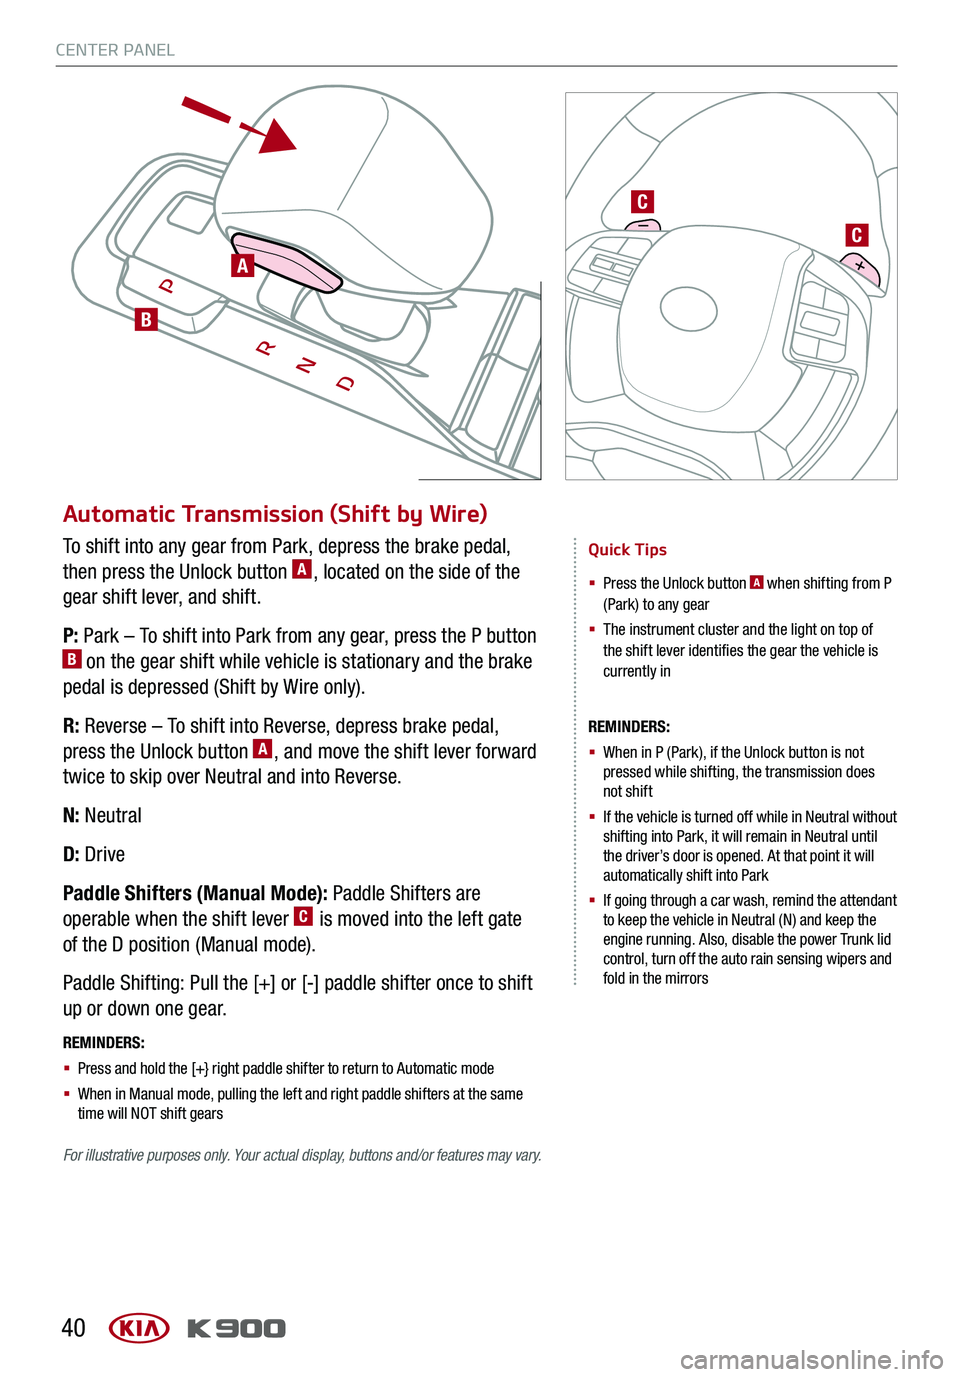 KIA K900 2020  Features and Functions Guide CENTER PANEL
40
Automatic Transmission (Shift by Wire)
Quick Tips
§   Press the Unlock button A when shifting from P (Park) to any gear
§   The instrument cluster and the light on top of the shift l